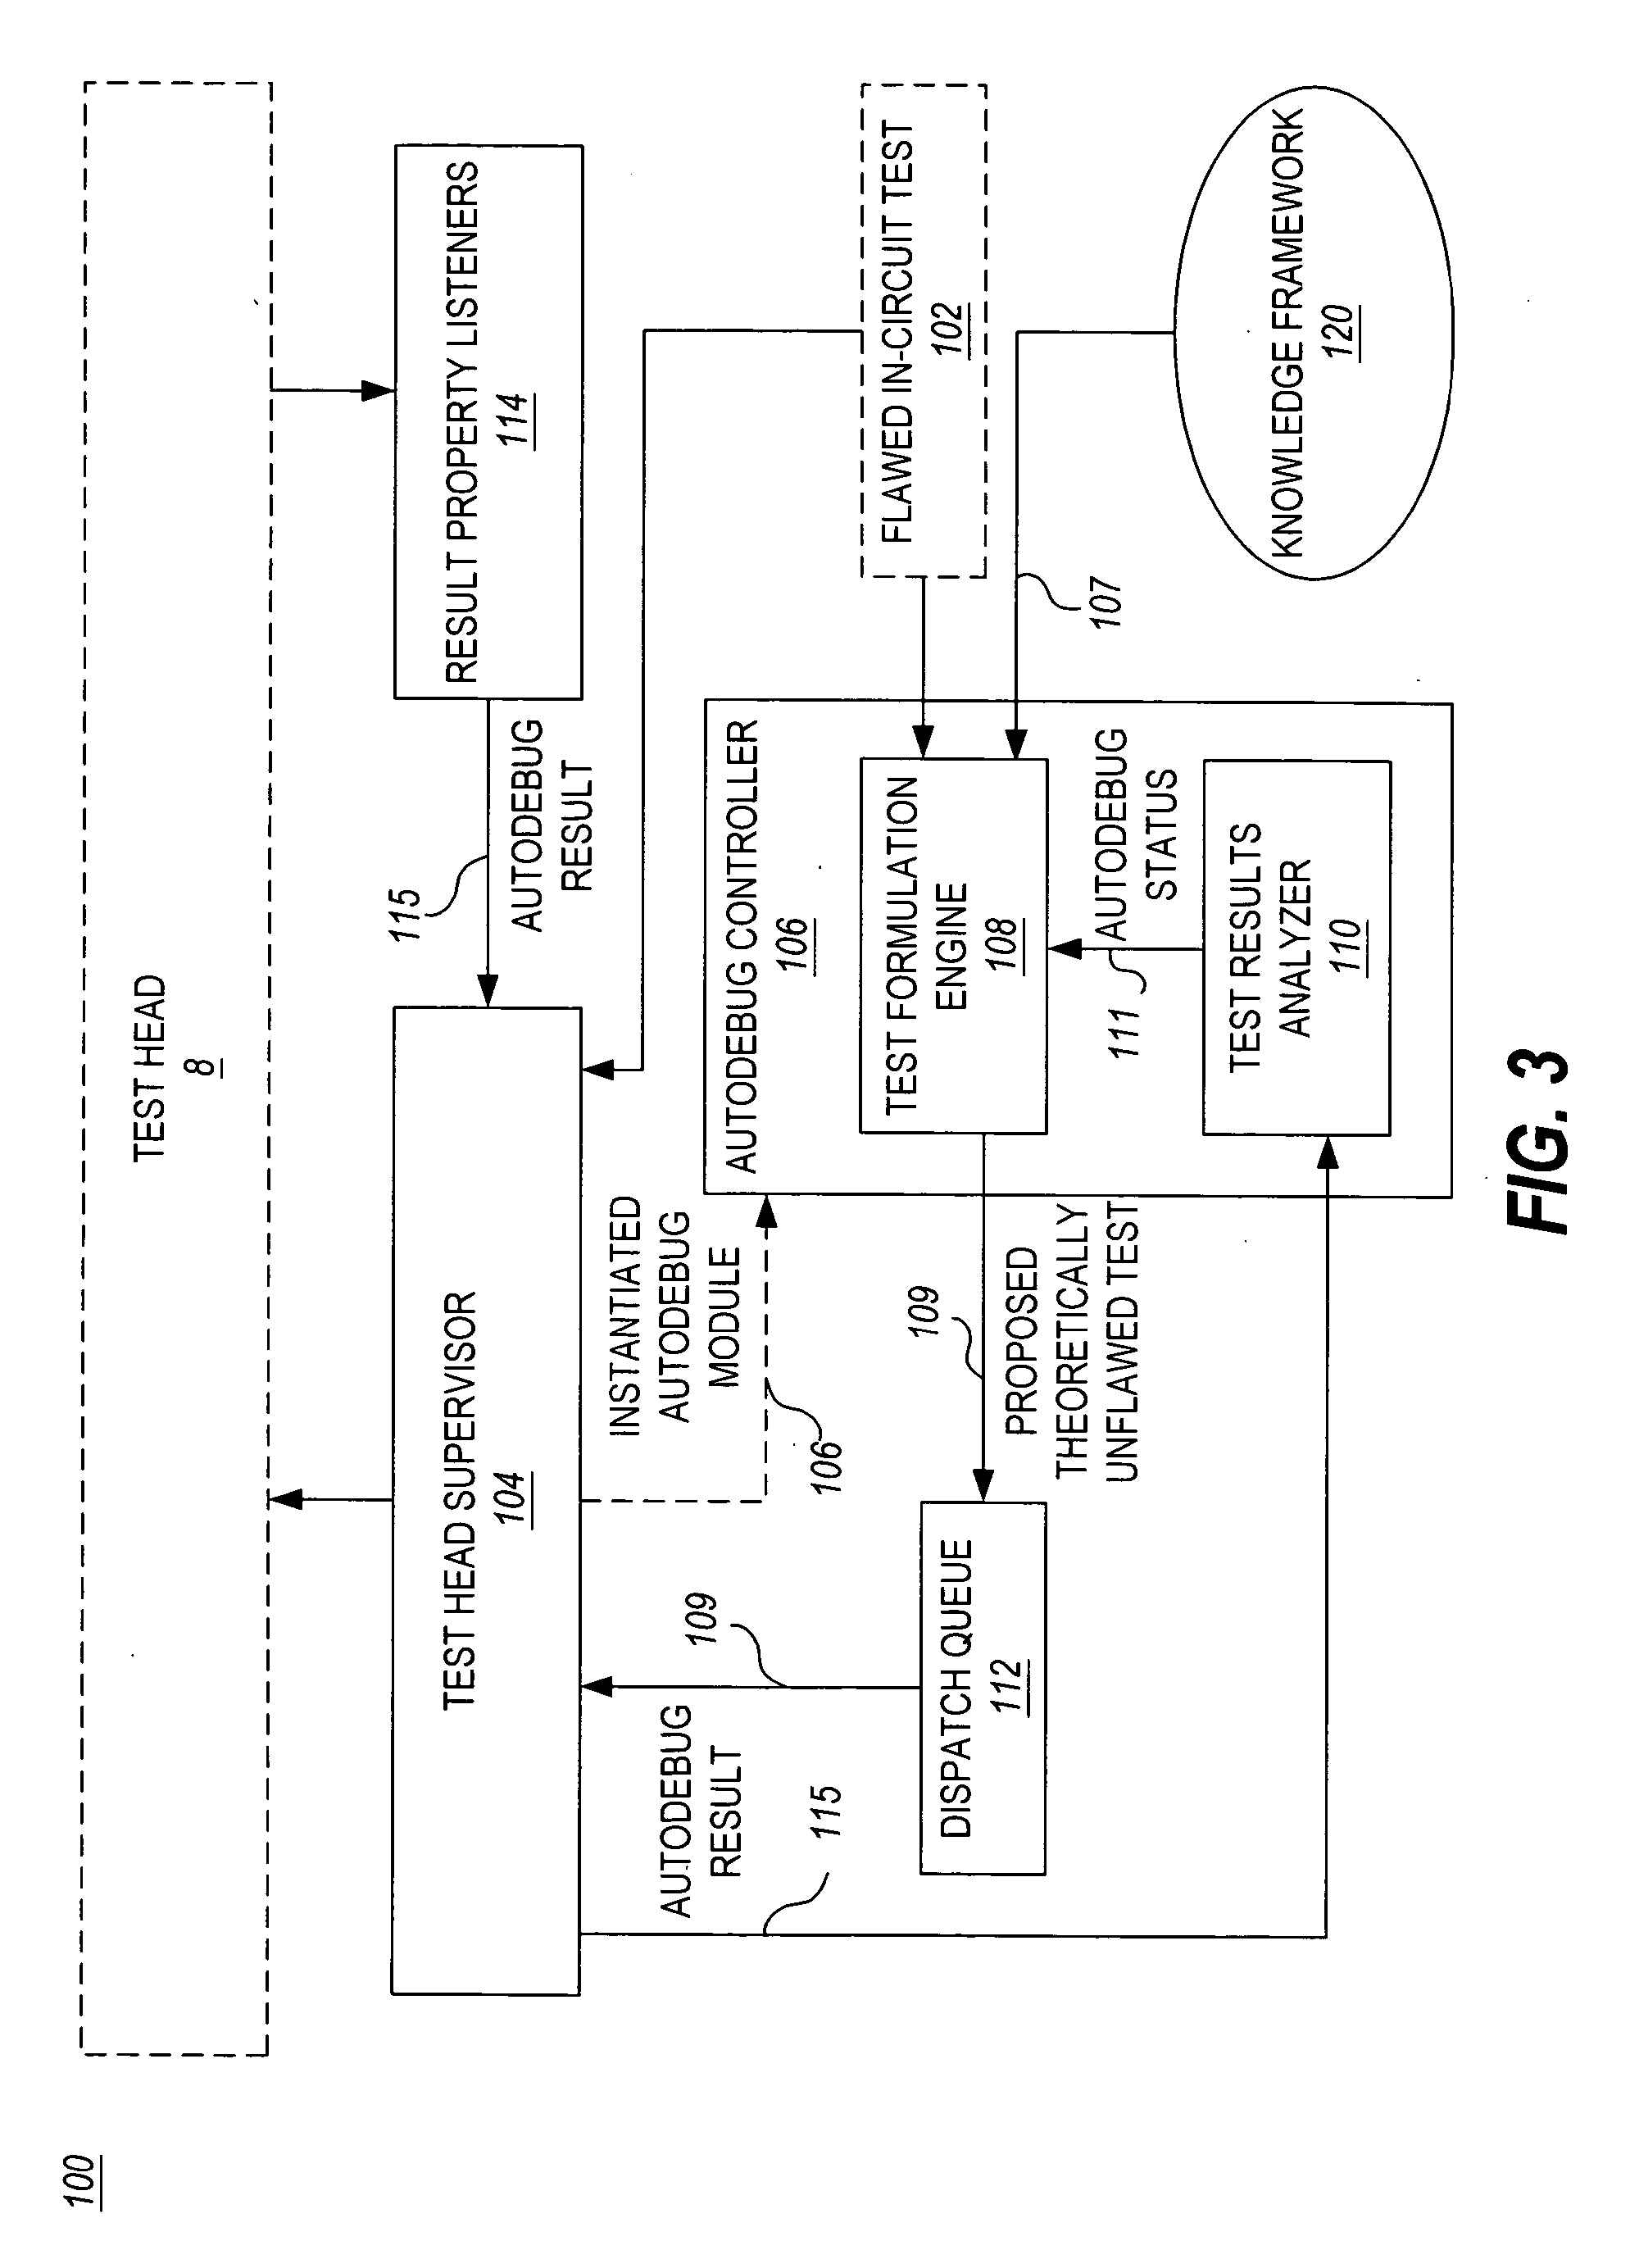 Method and apparatus for automated debug and optimization of in-circuit tests